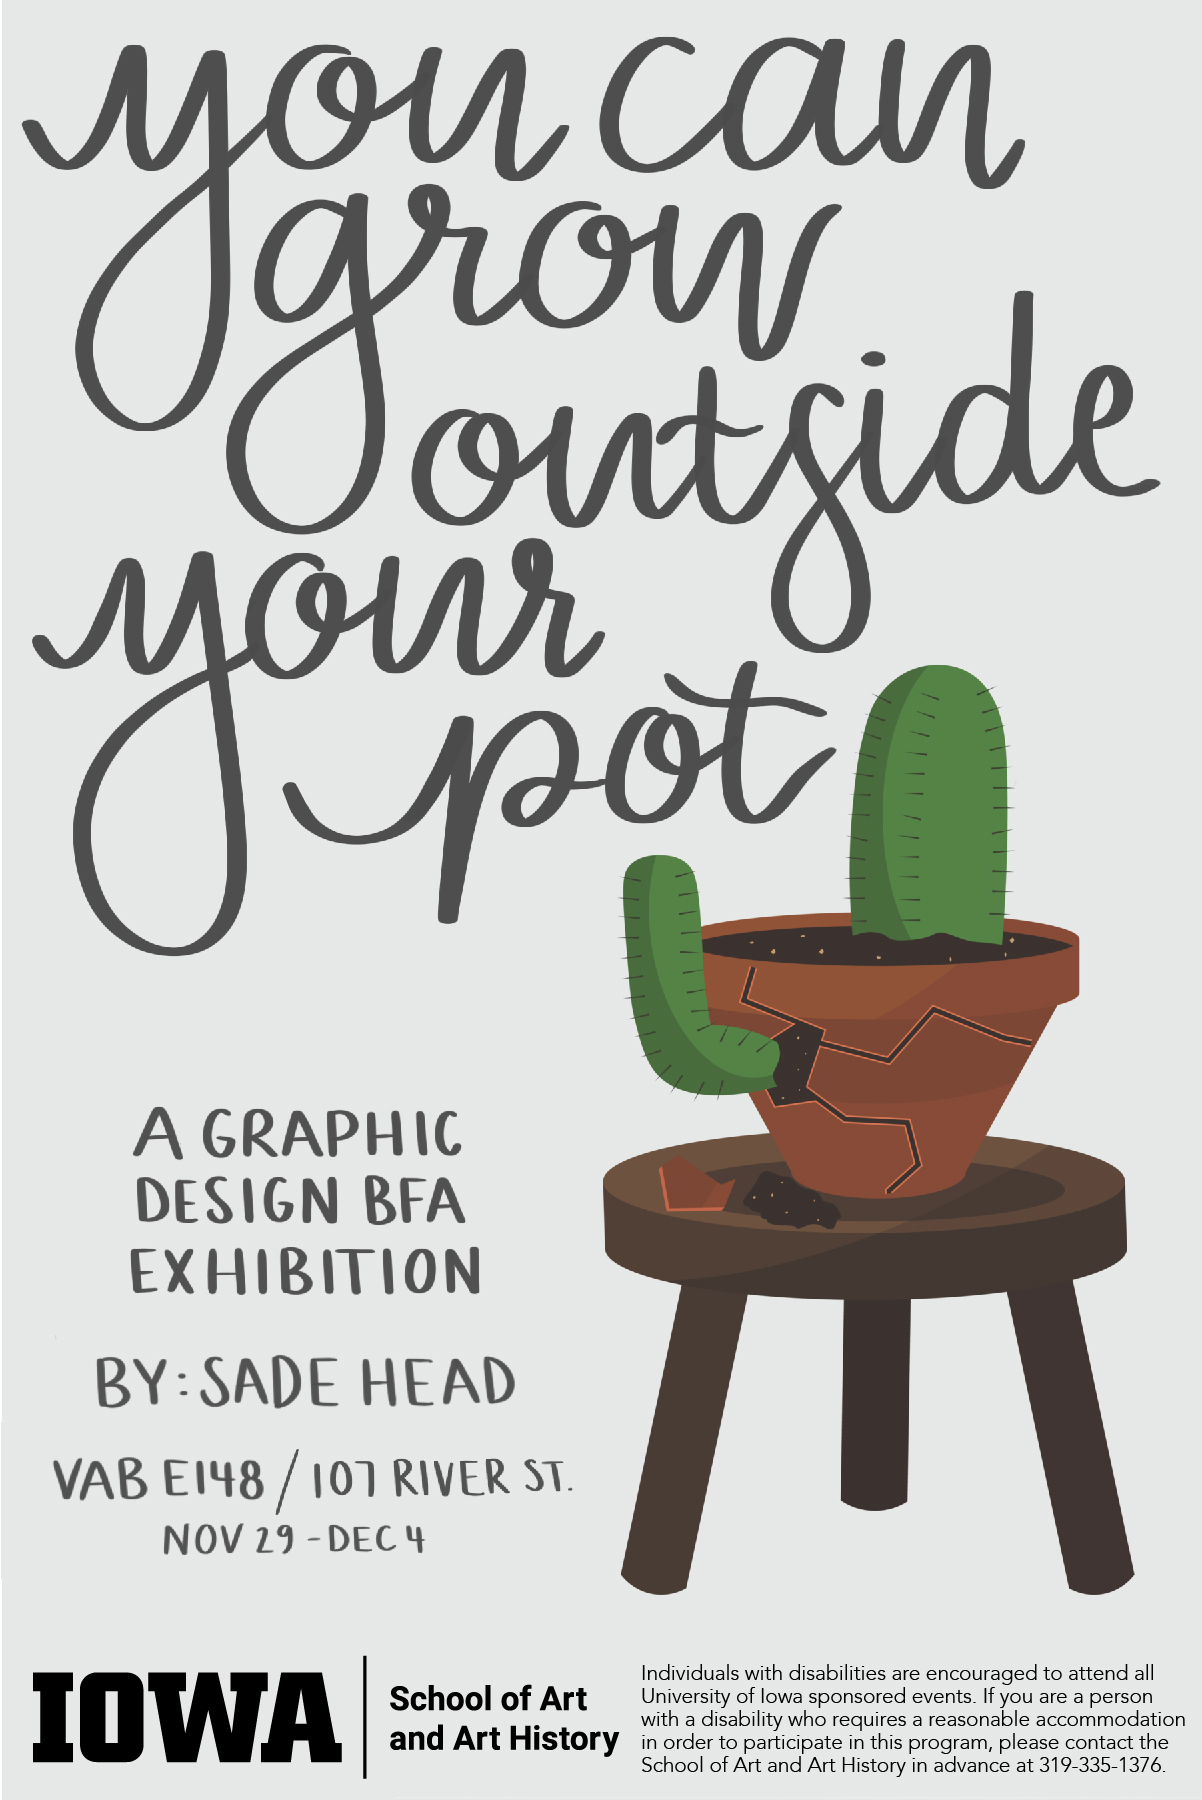 grey words, white background, brown stook with a green cactus breaking through a clay pot with black dirt